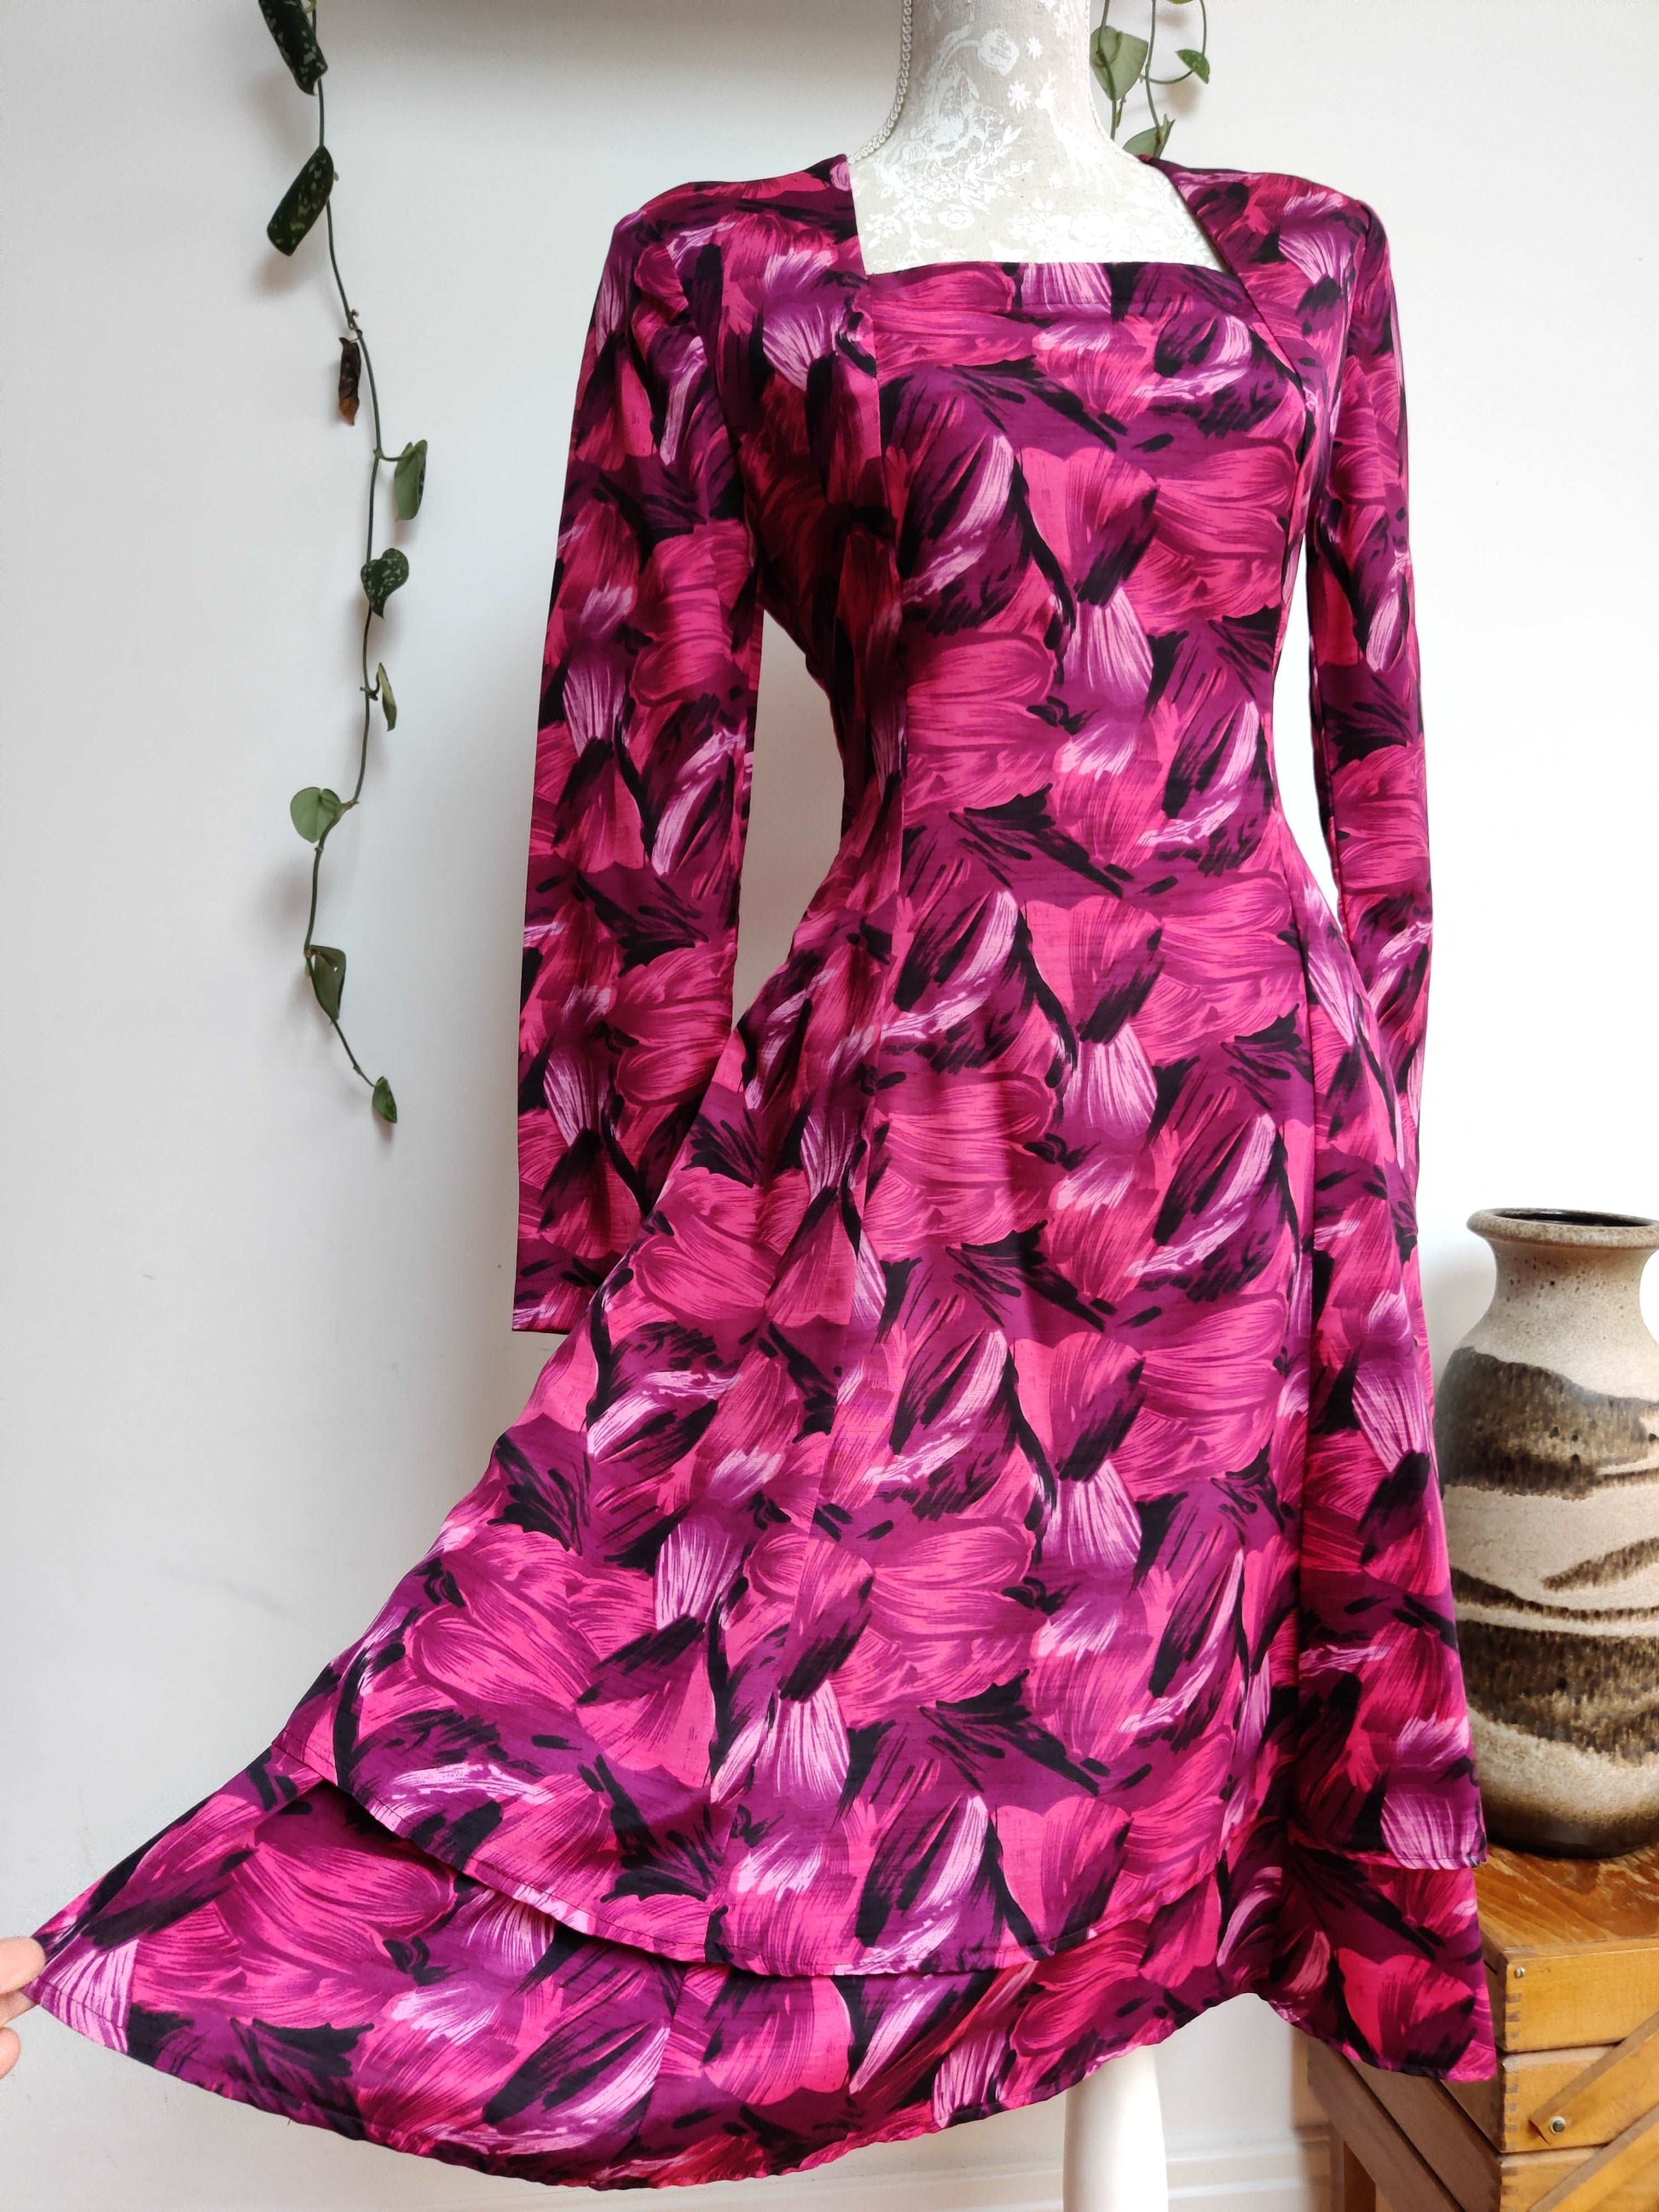 Beautiful 60s floral dress in vibrant pink. Size 12.